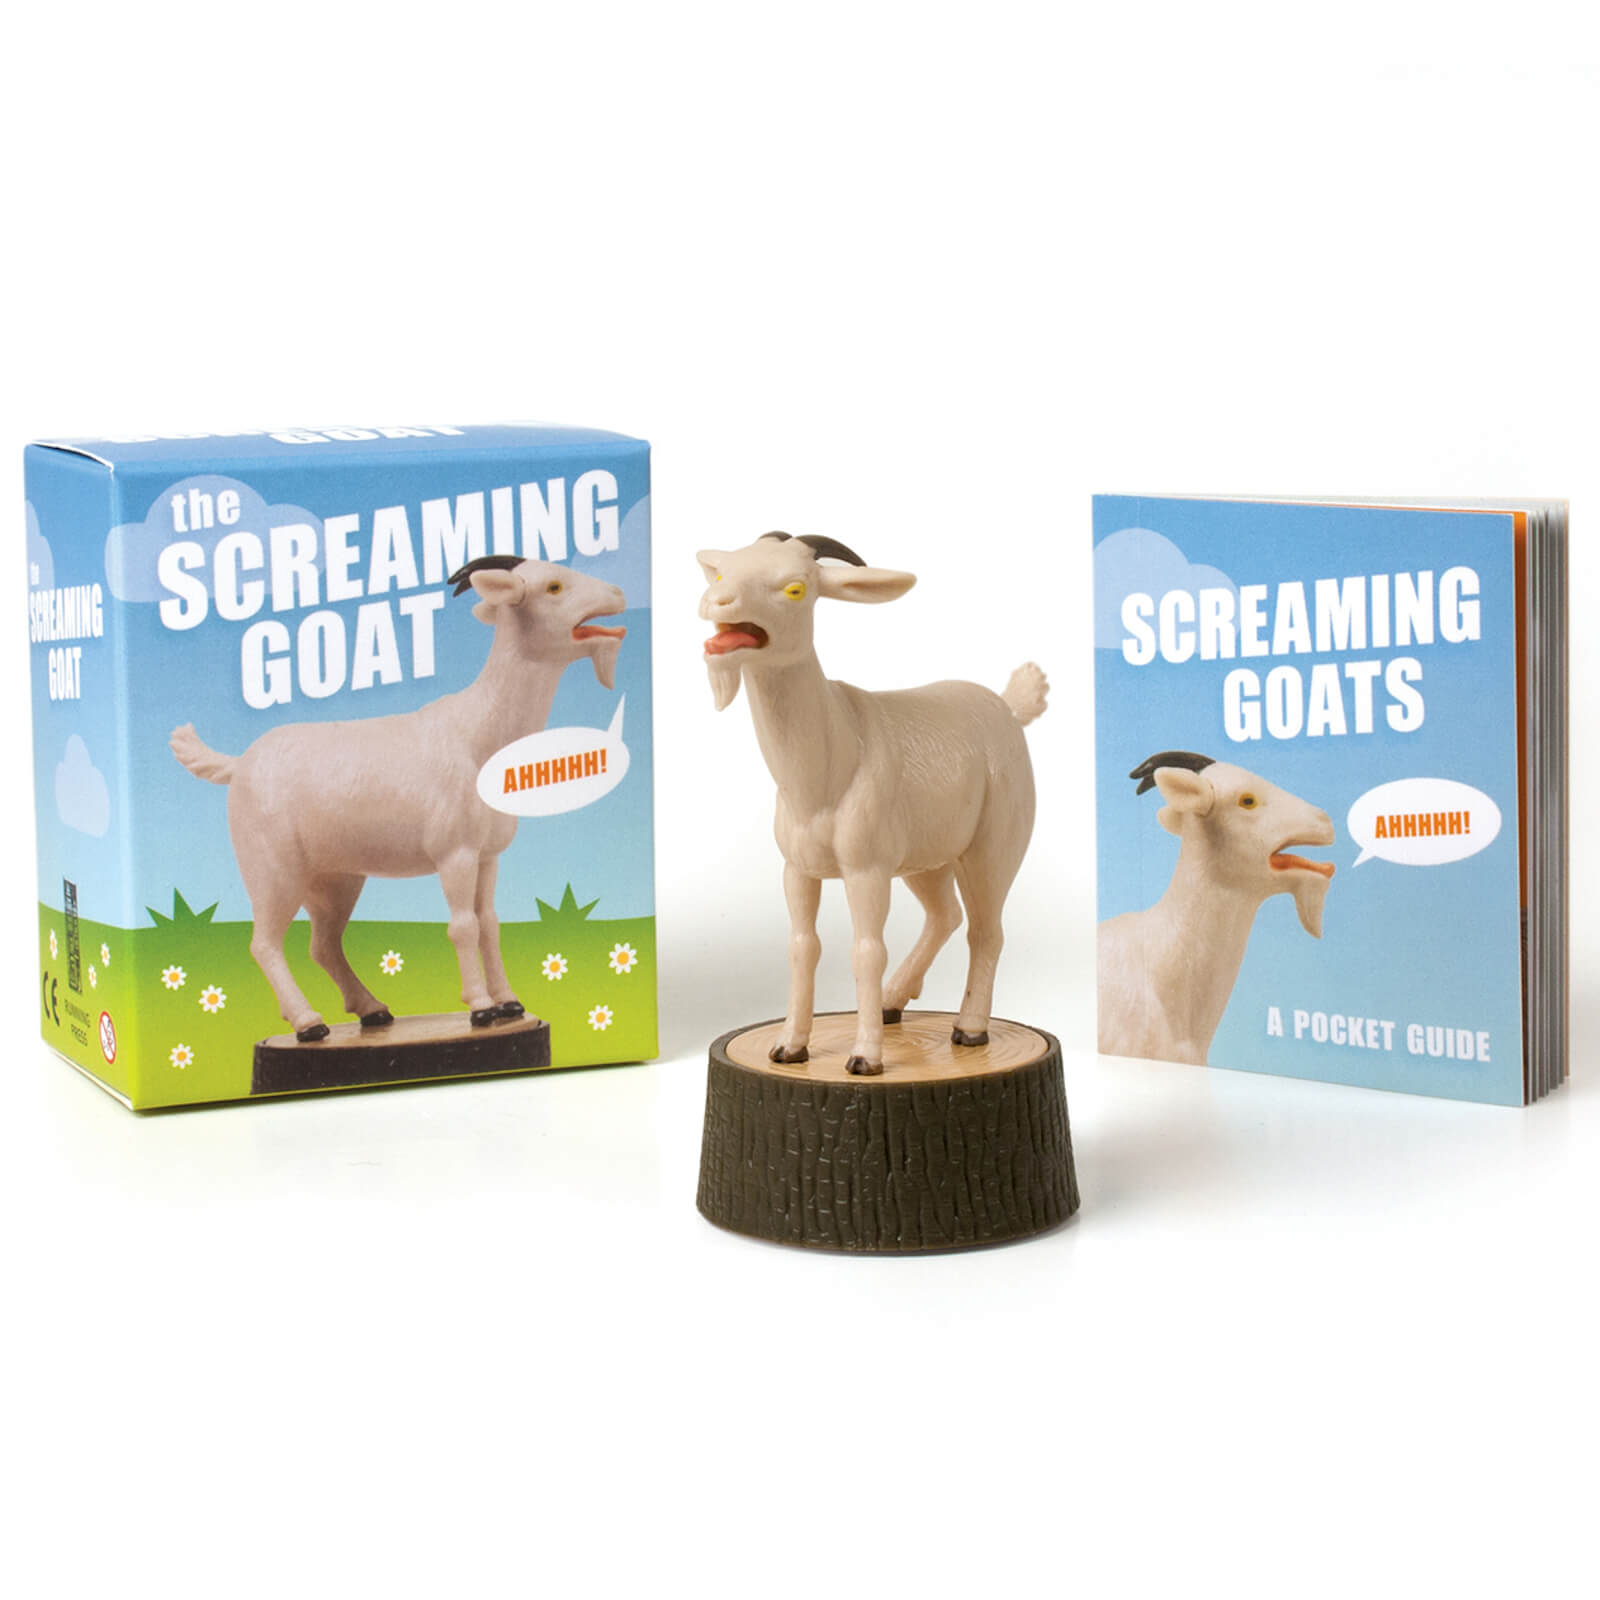 Image of The Screaming Goat